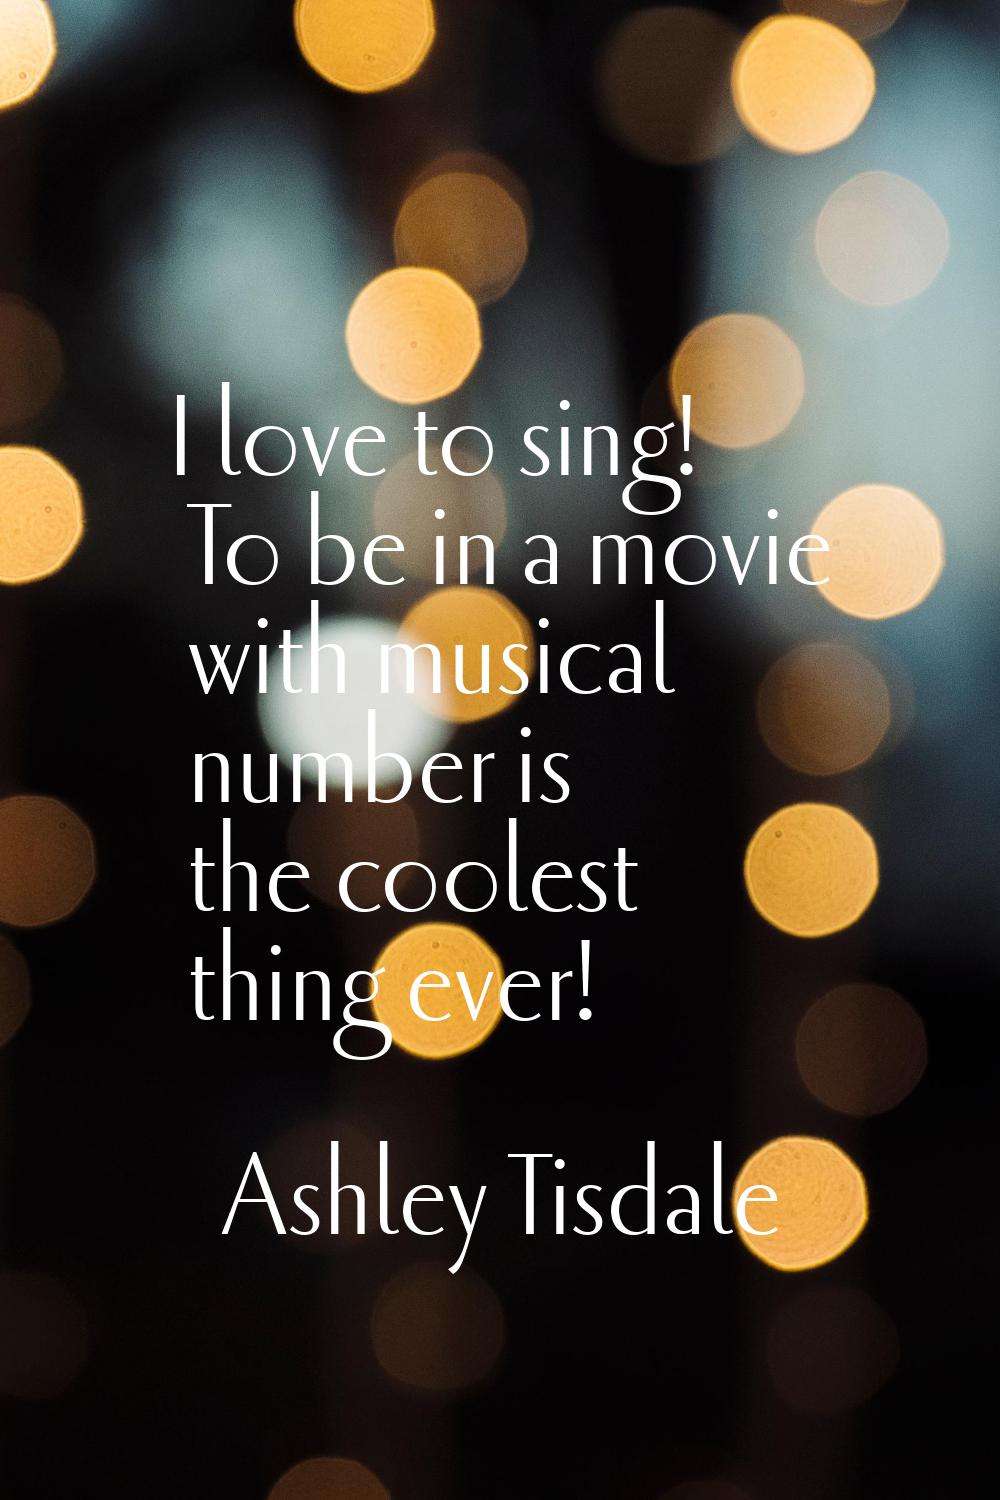 I love to sing! To be in a movie with musical number is the coolest thing ever!